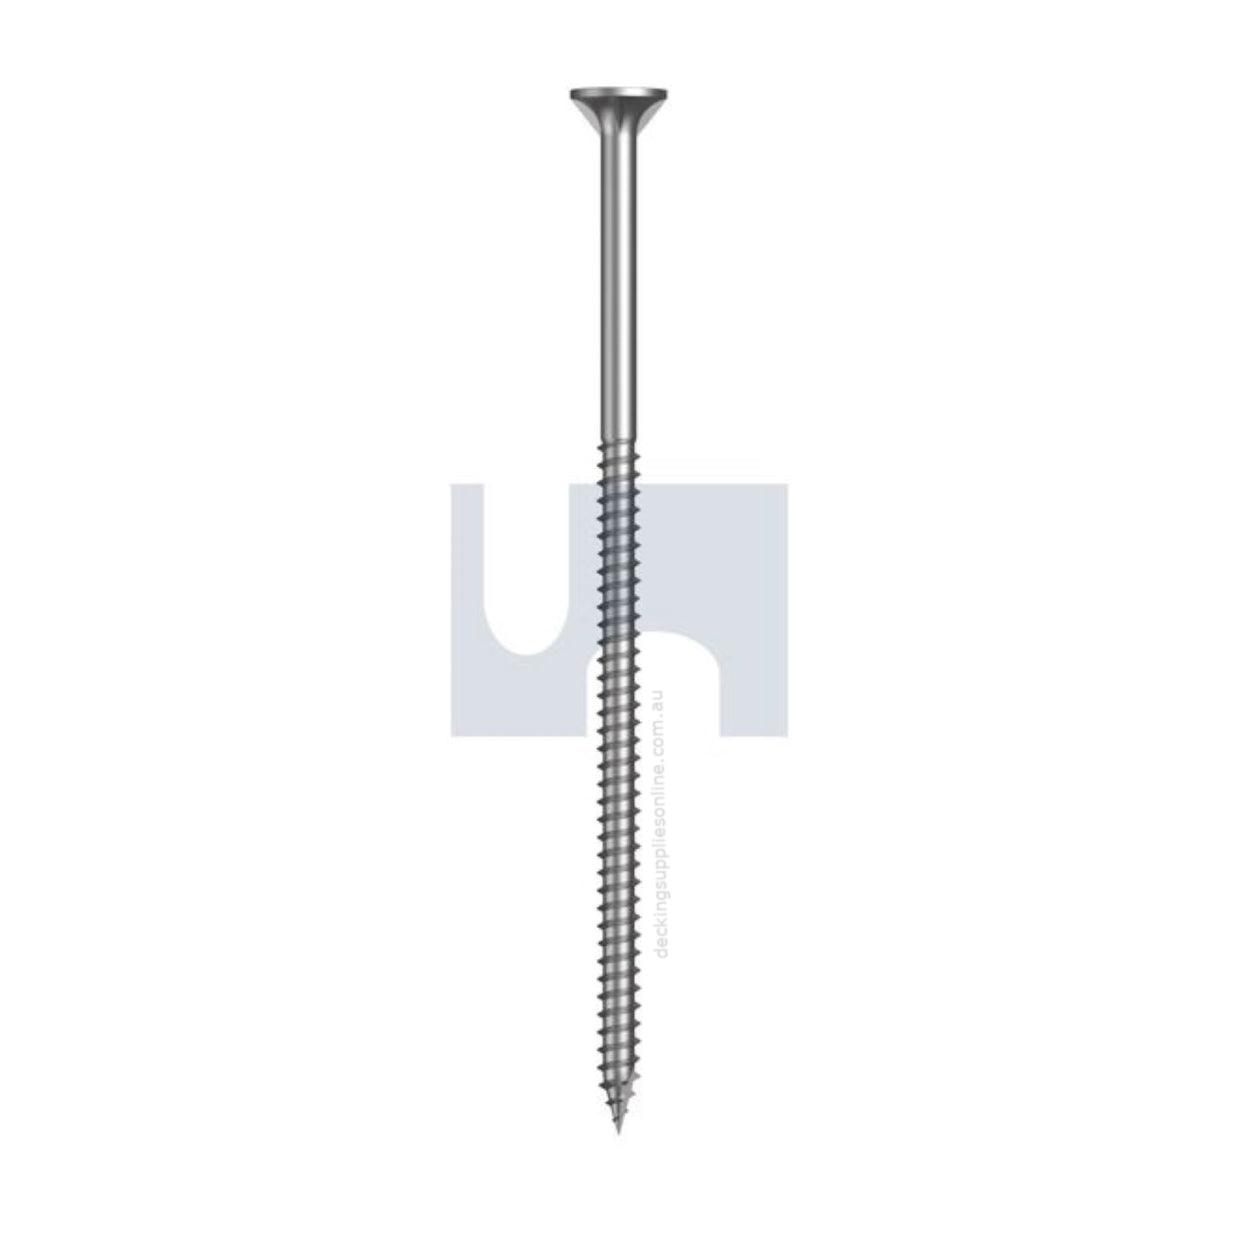 HOBSON - Bugle Head 14G 150mm 304 Stainless Steel, Self-Drilling Type 17 - Box of 250